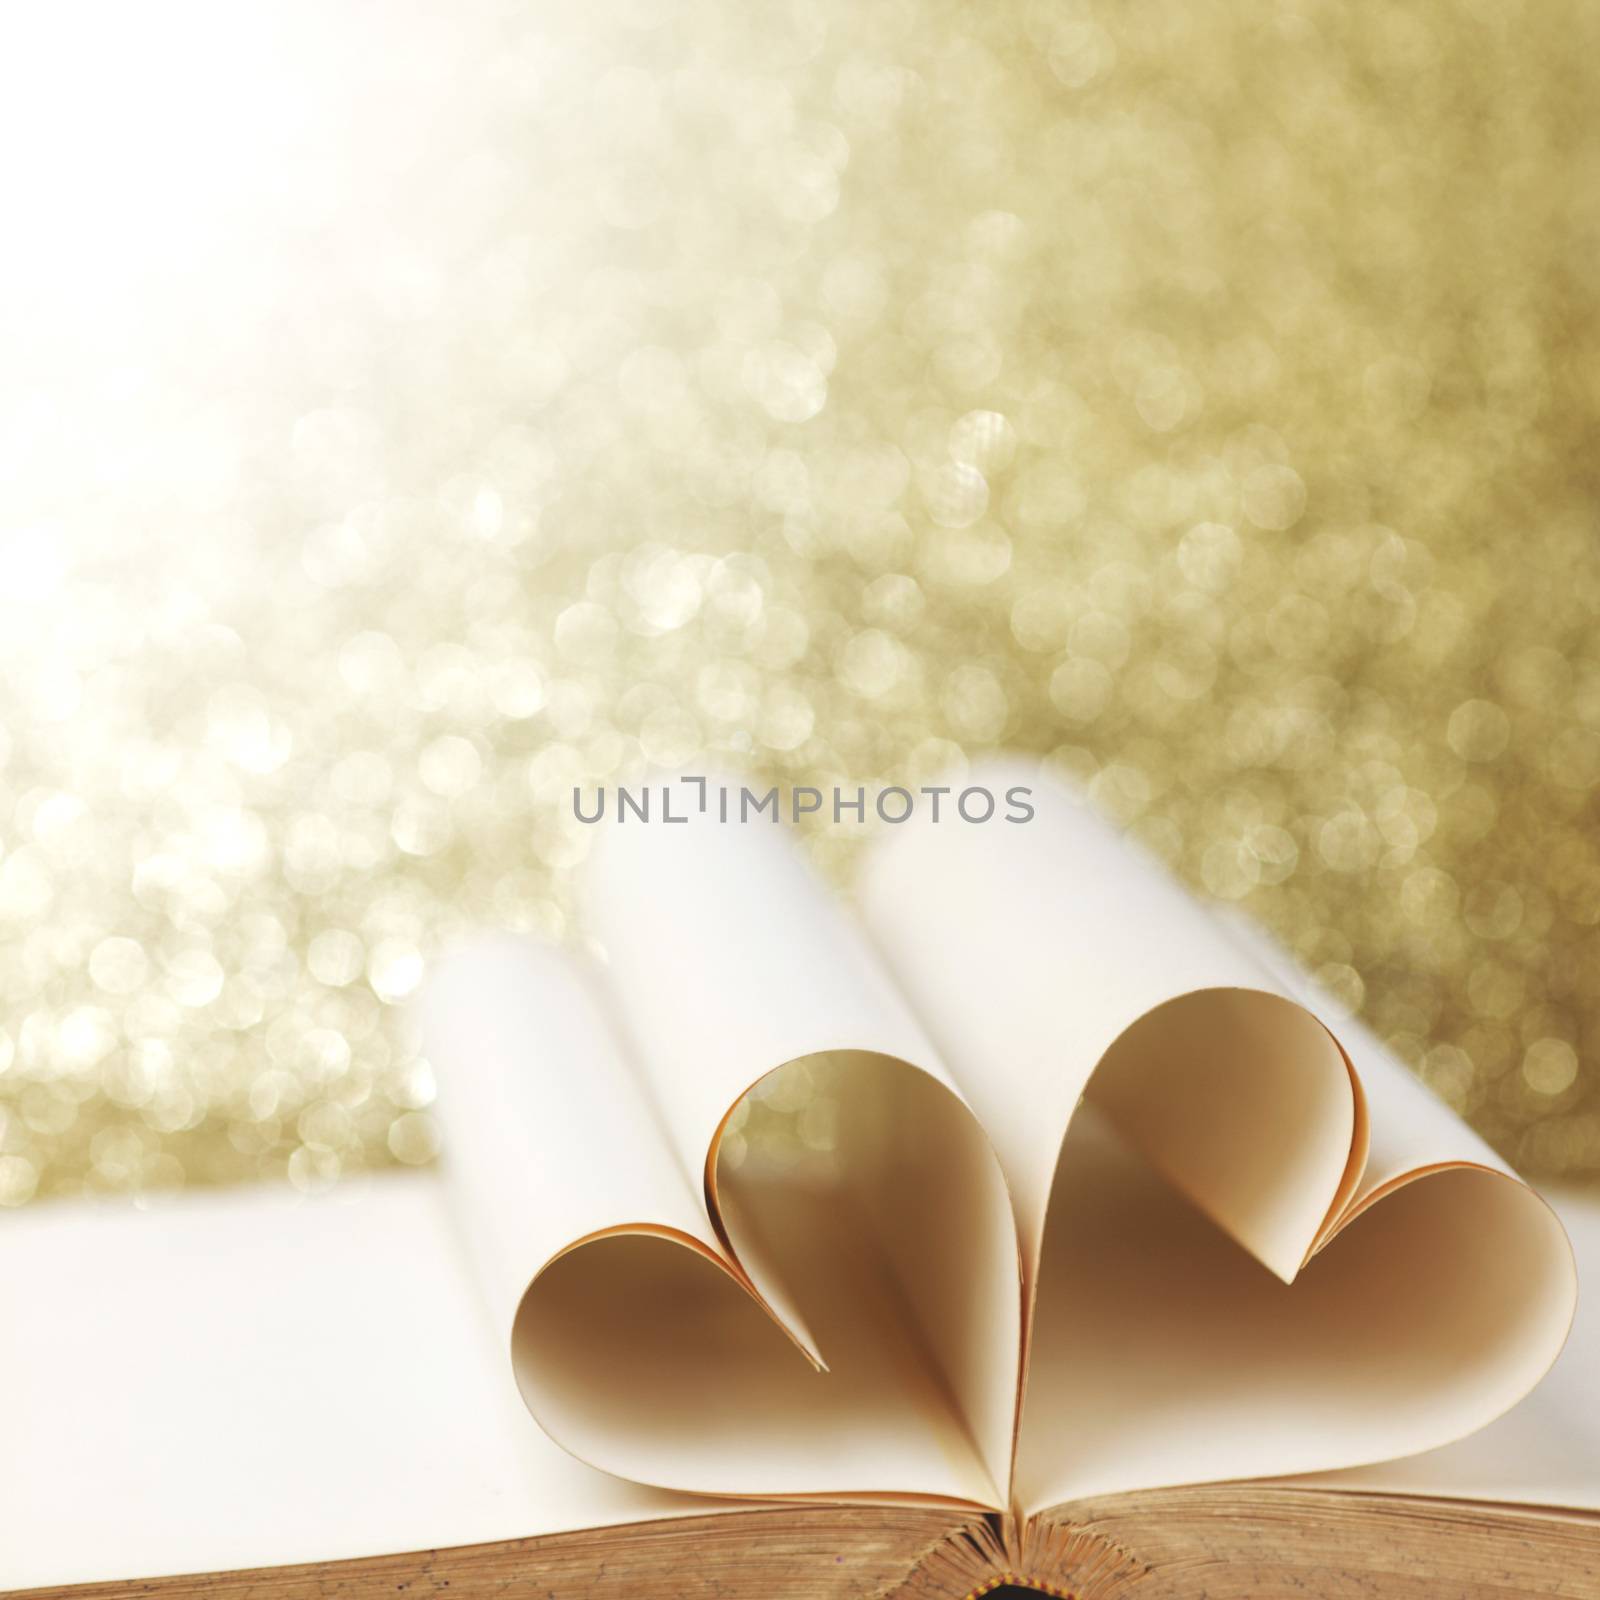 Heart shaped book pages by Yellowj